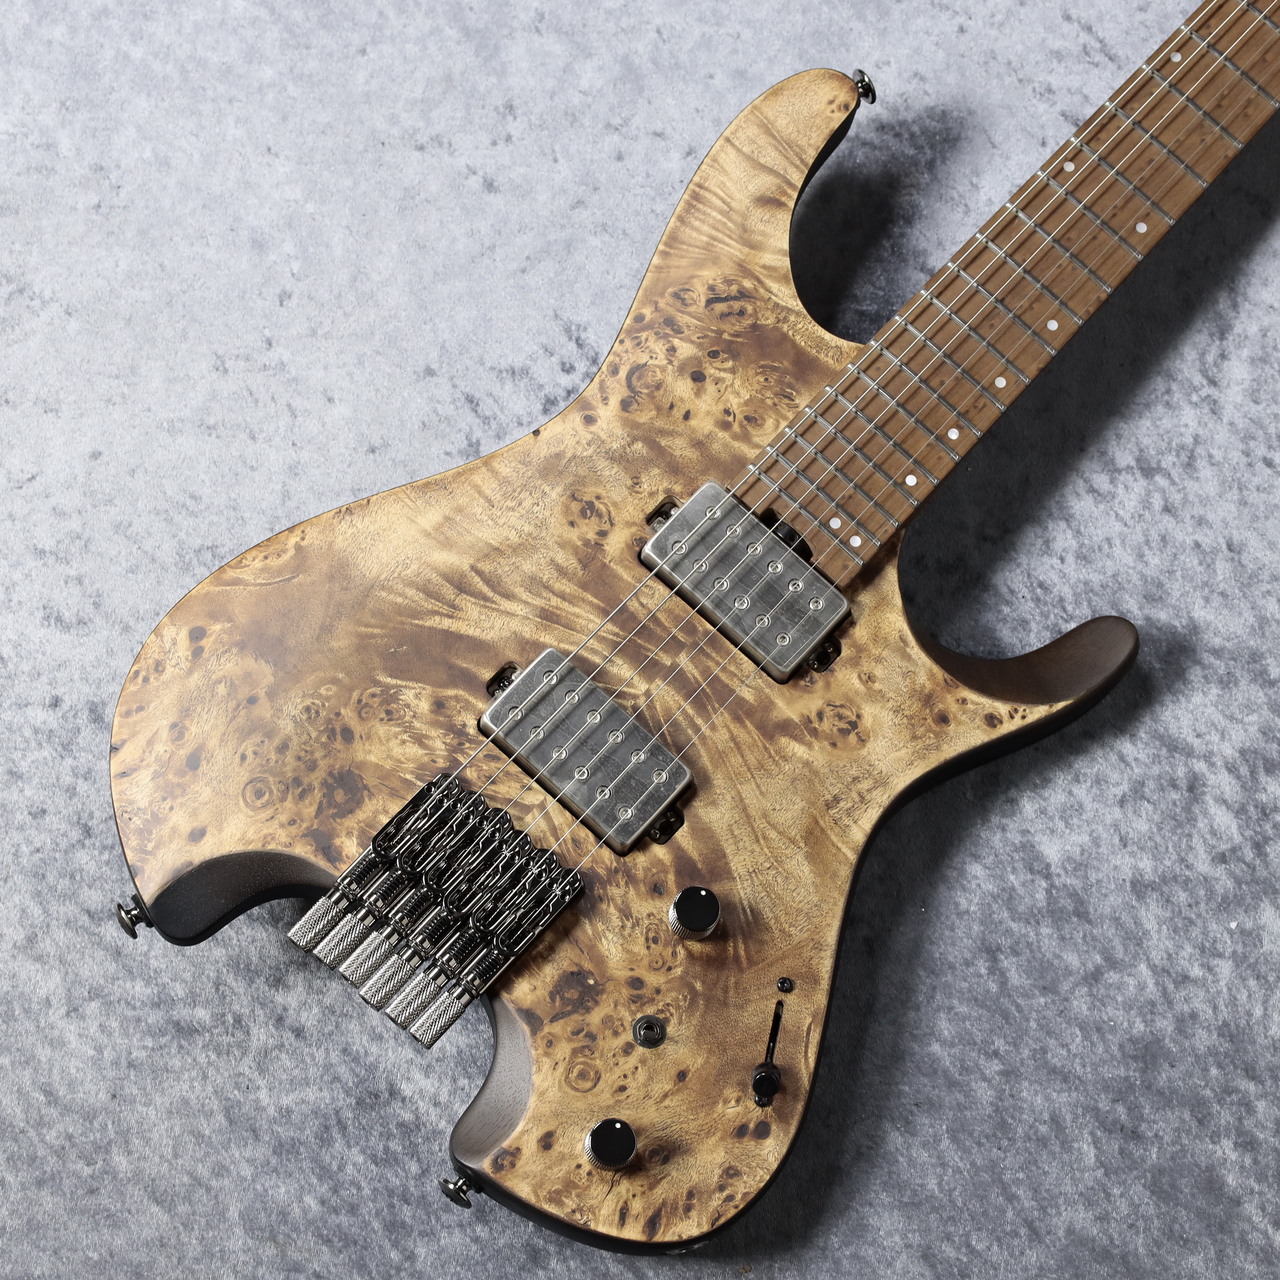 Ibanez Q52PB 「ABS : Antique Brown Stained」 ステンレスフレットの